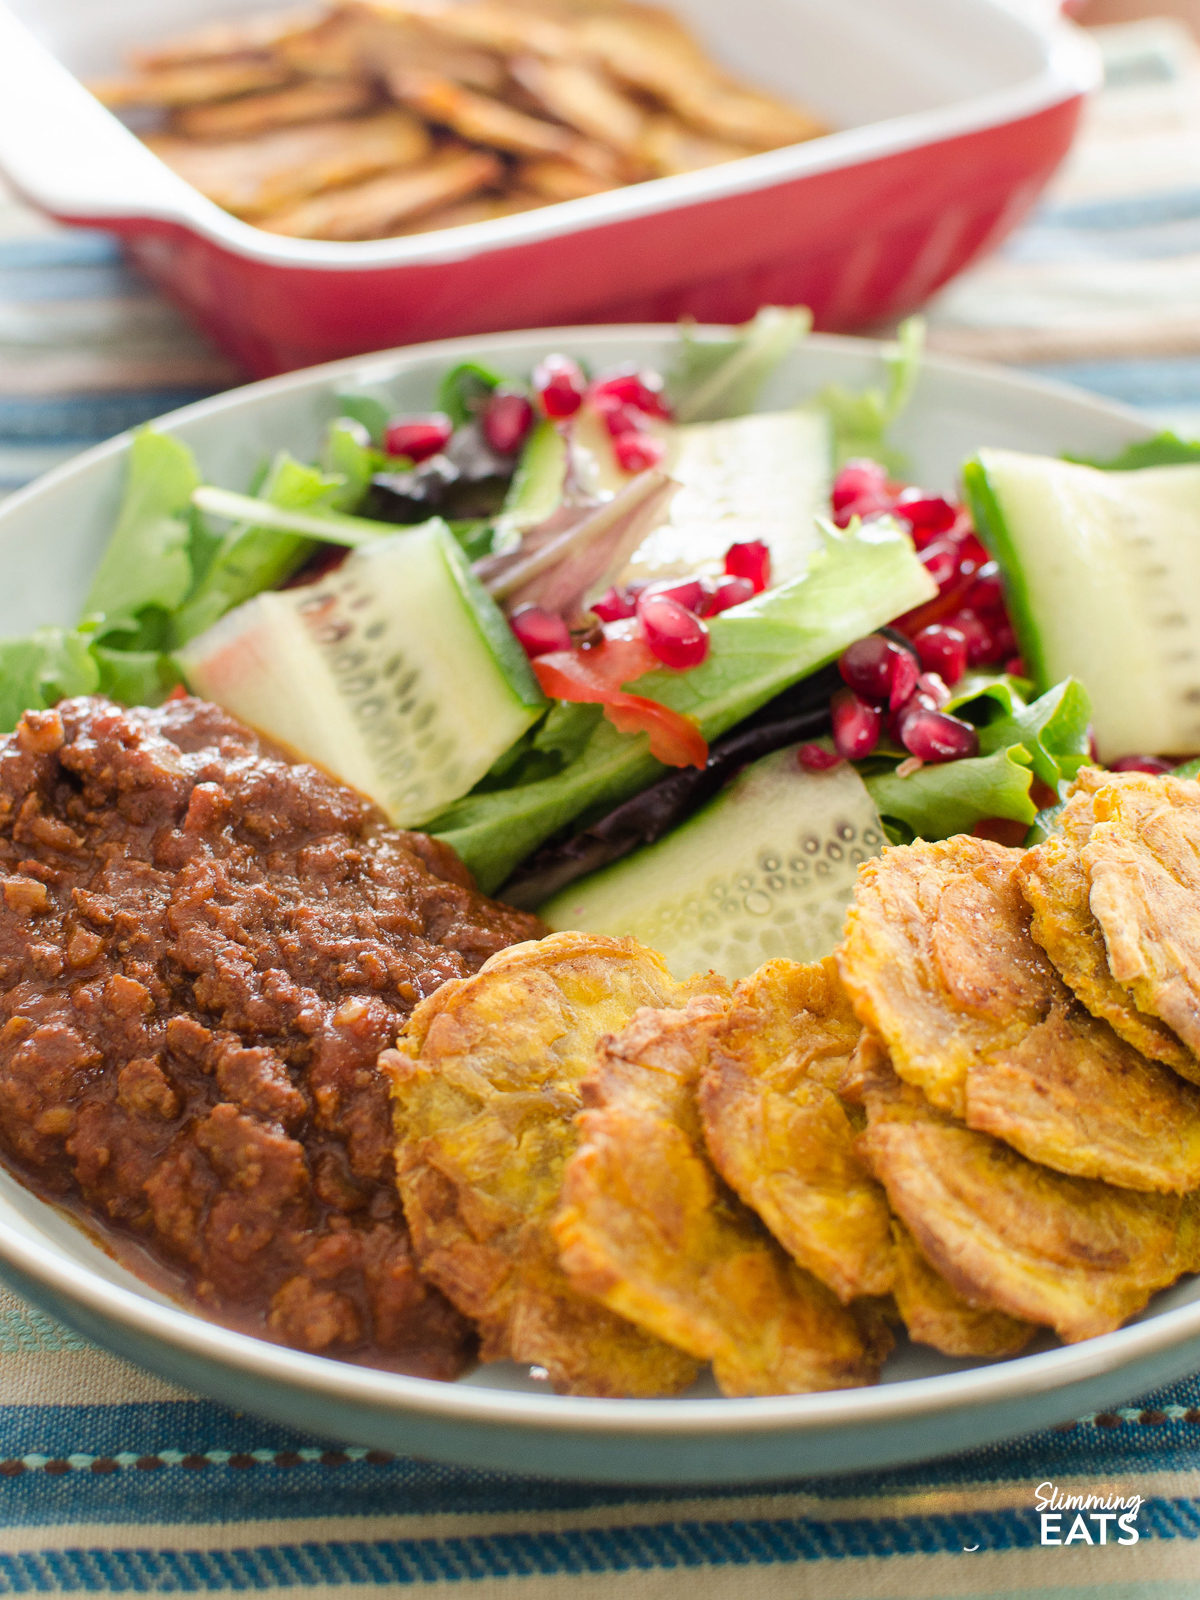 Baked Tostones in a bowl with salad and chilli